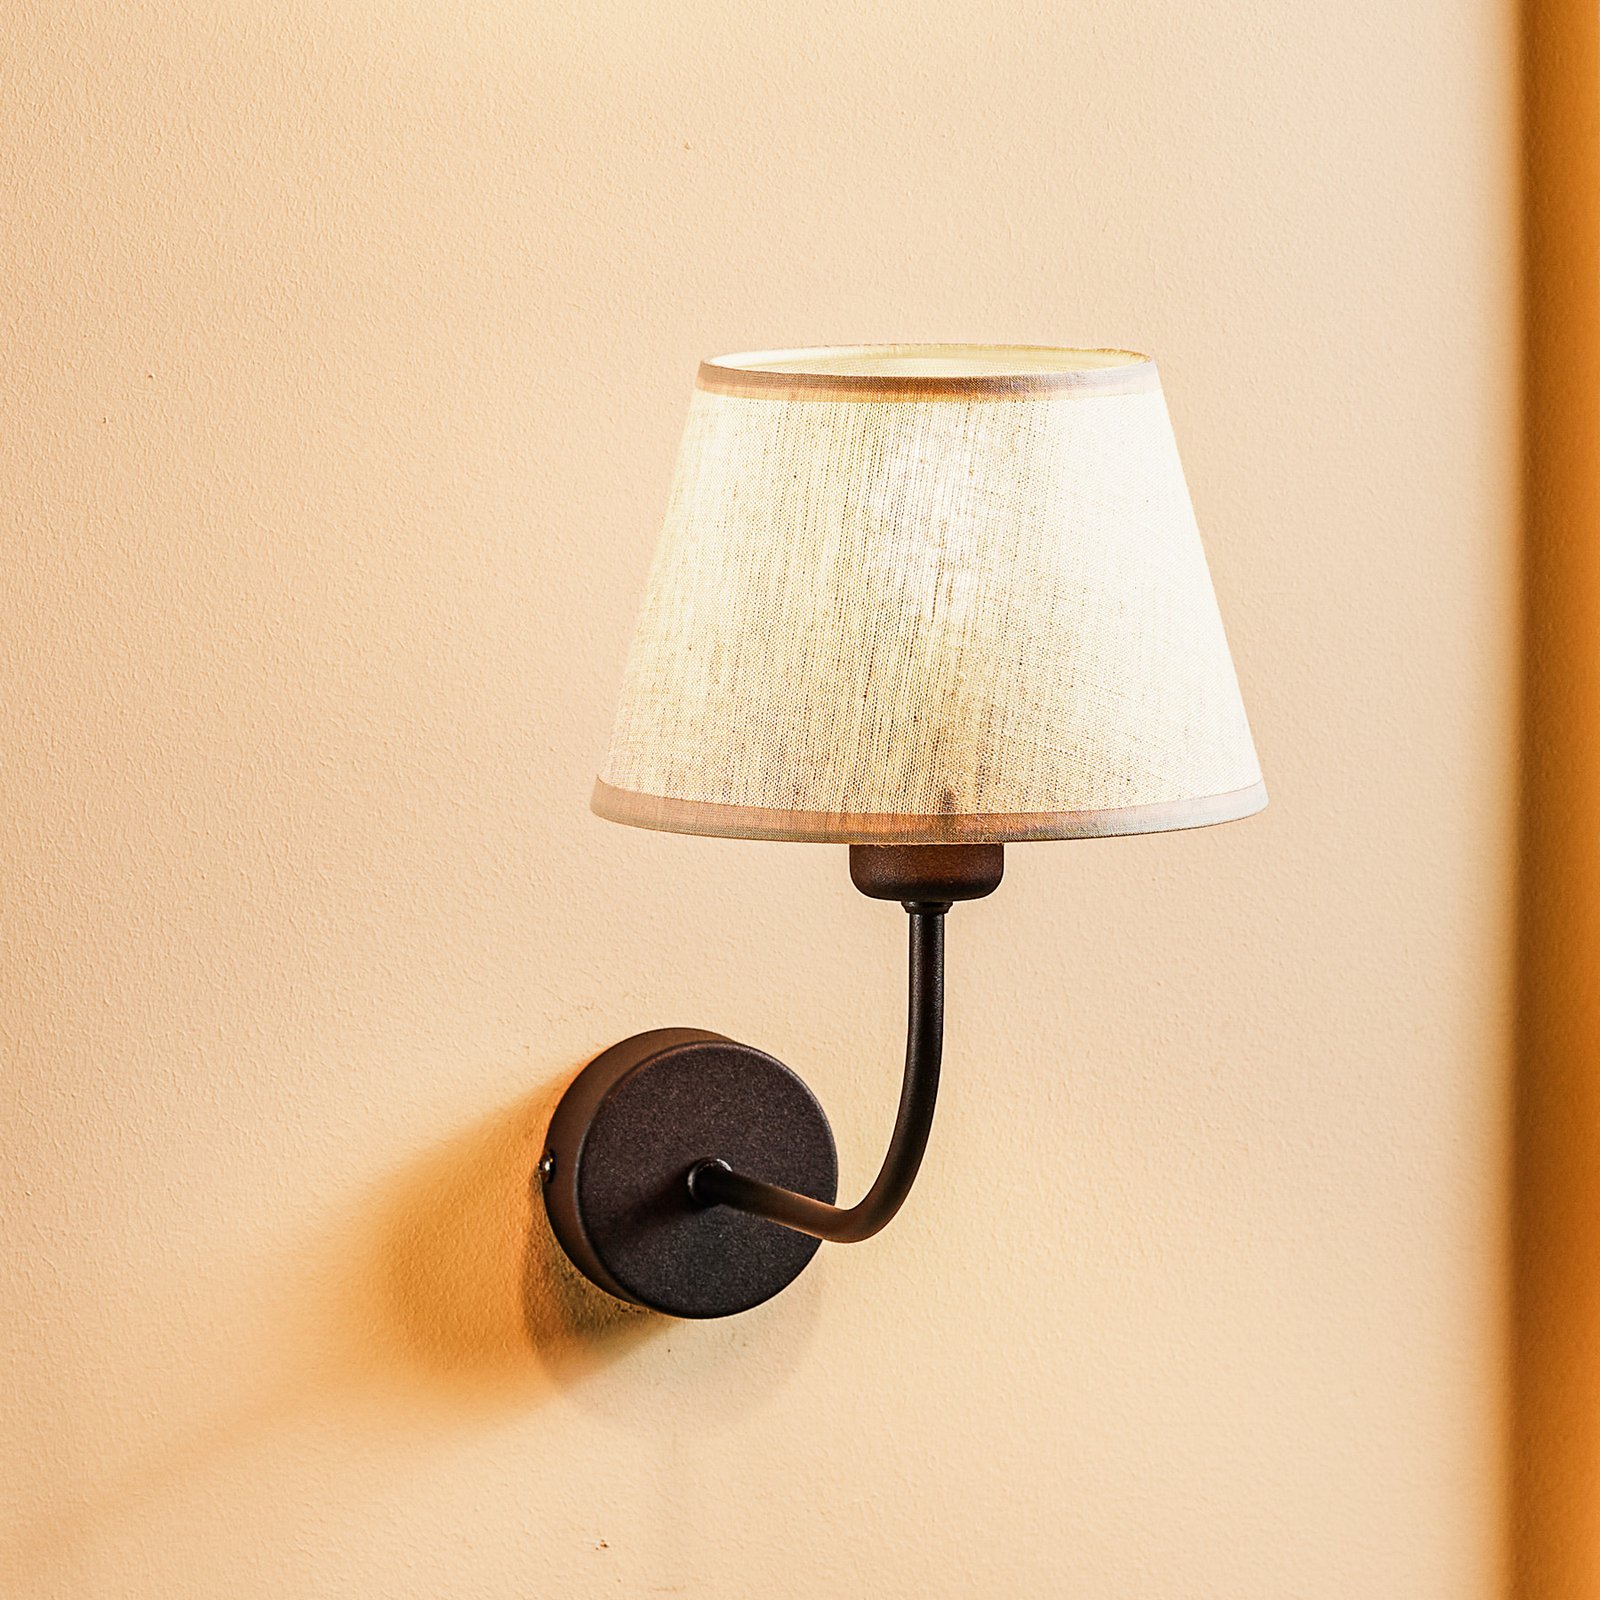 Chicago wall light with a linen lampshade